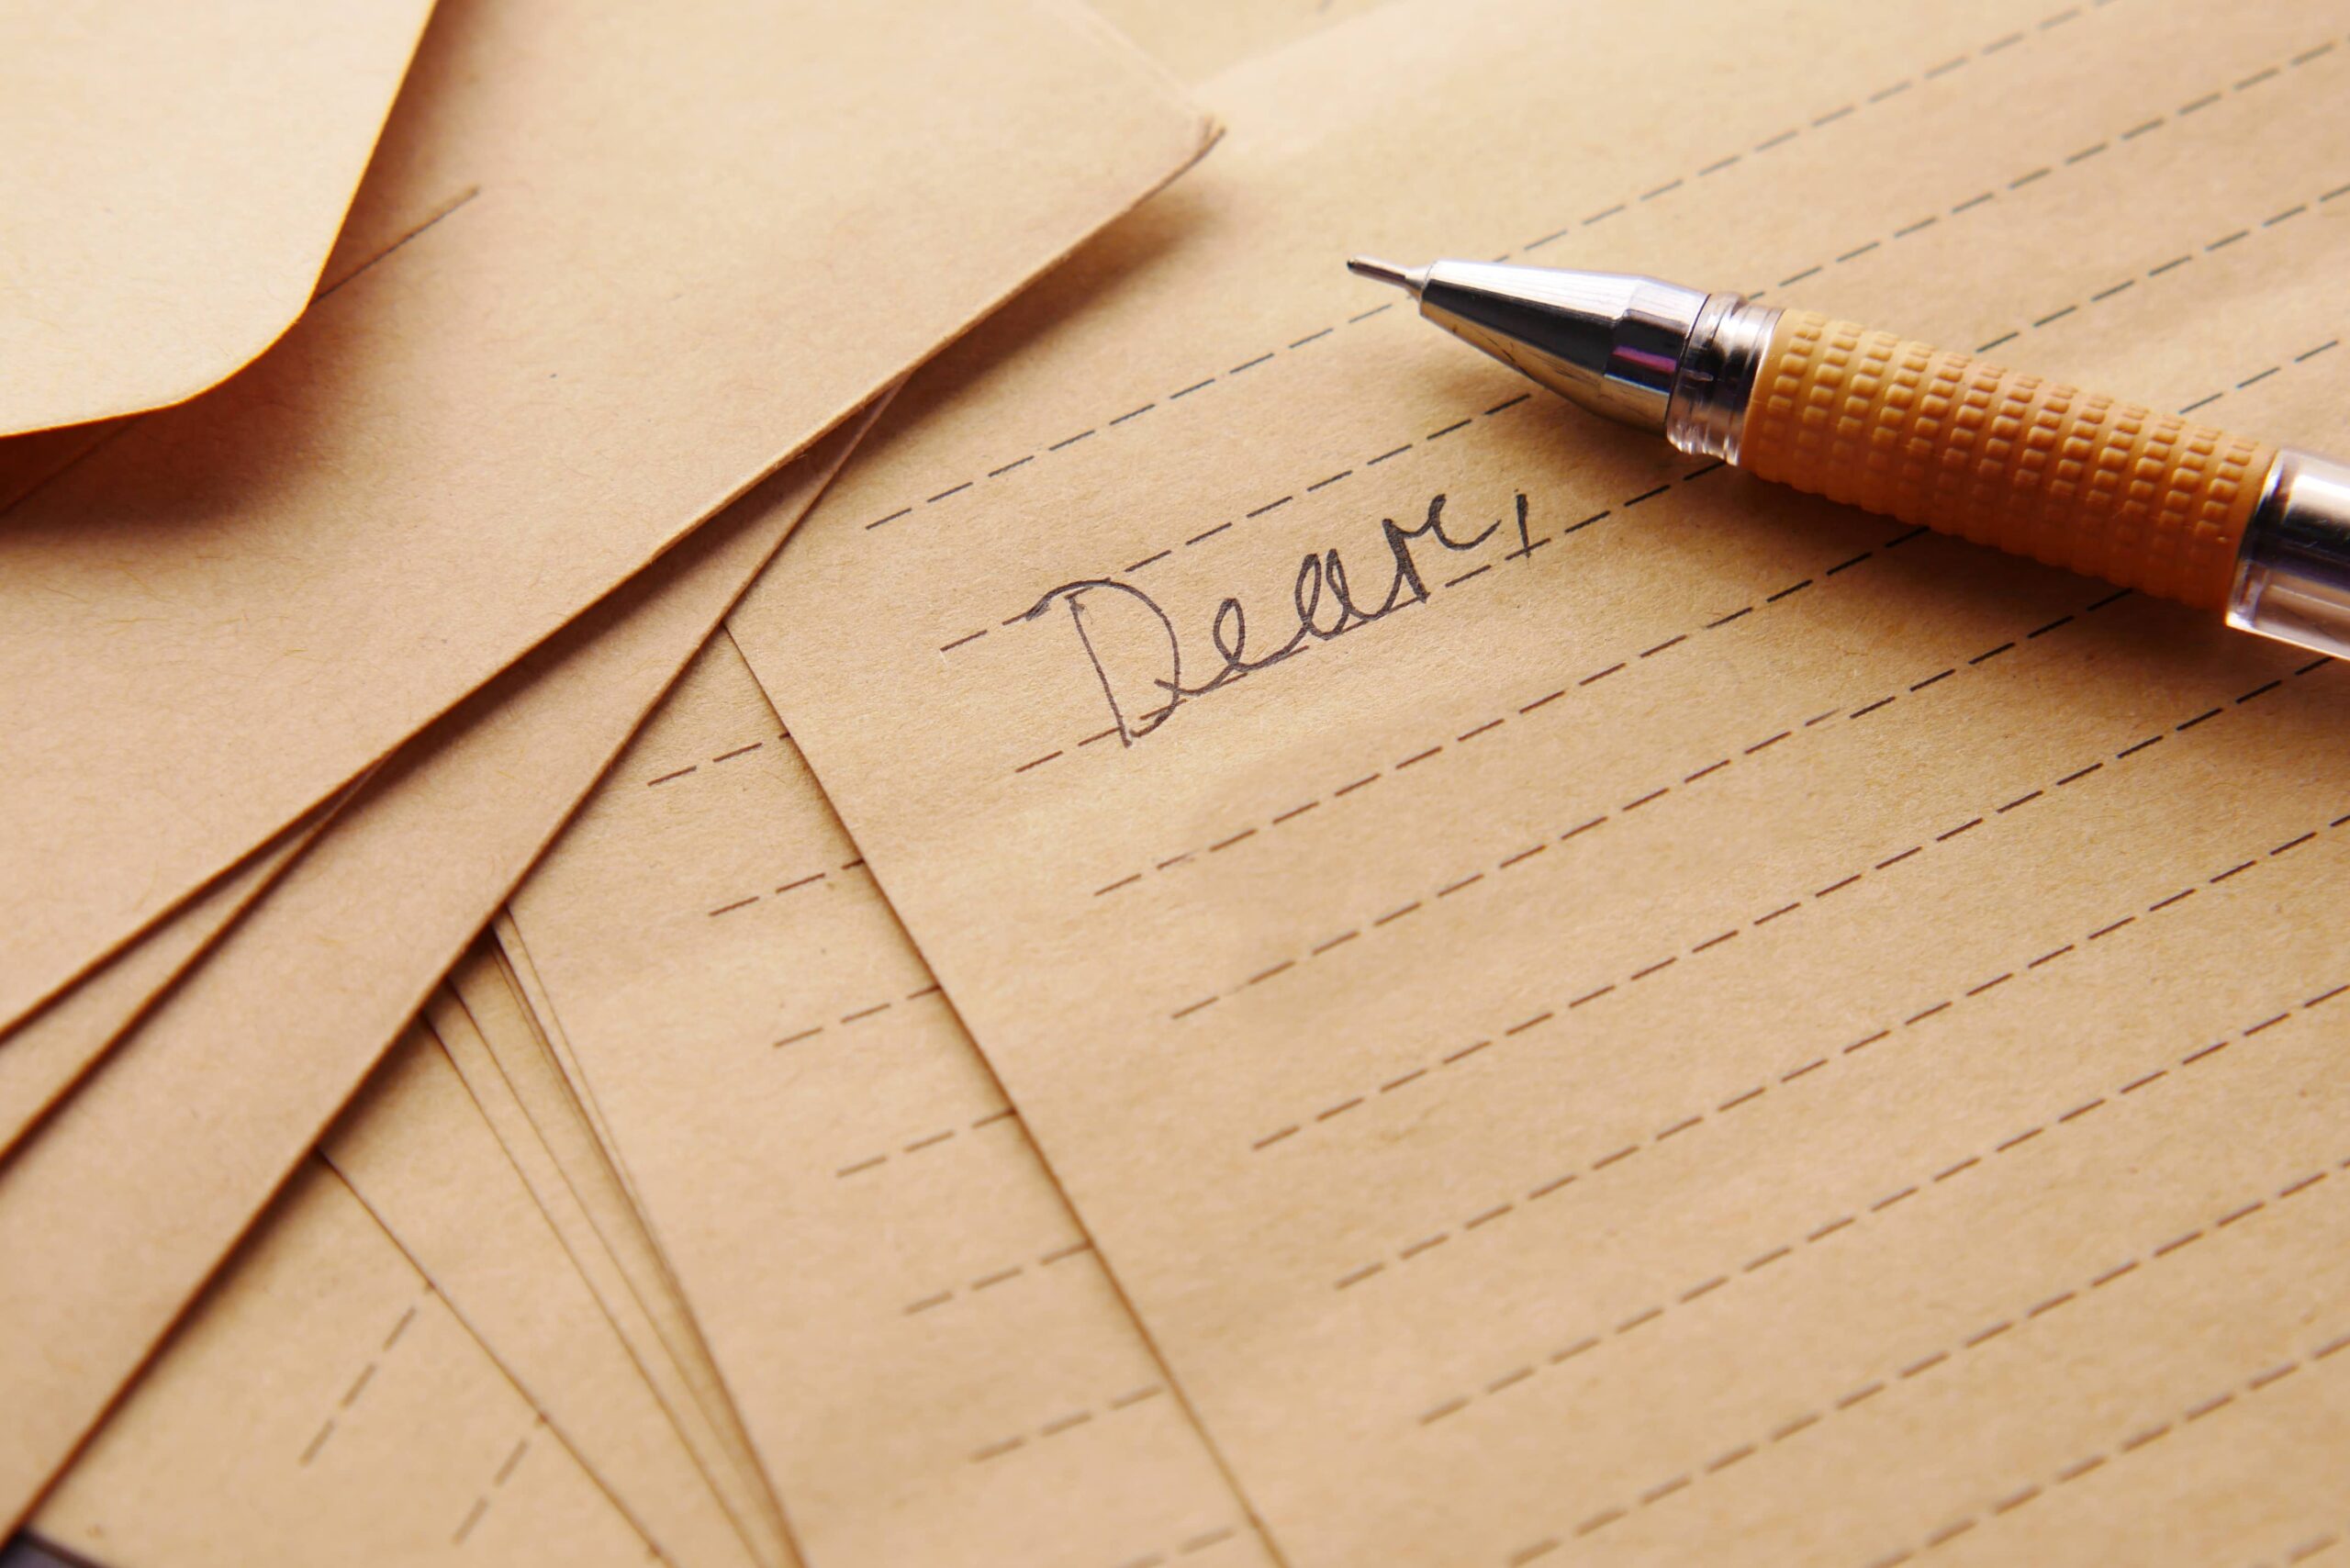 A lined piece of stationery with the word Dear in pen and the pen is resting on the paper.